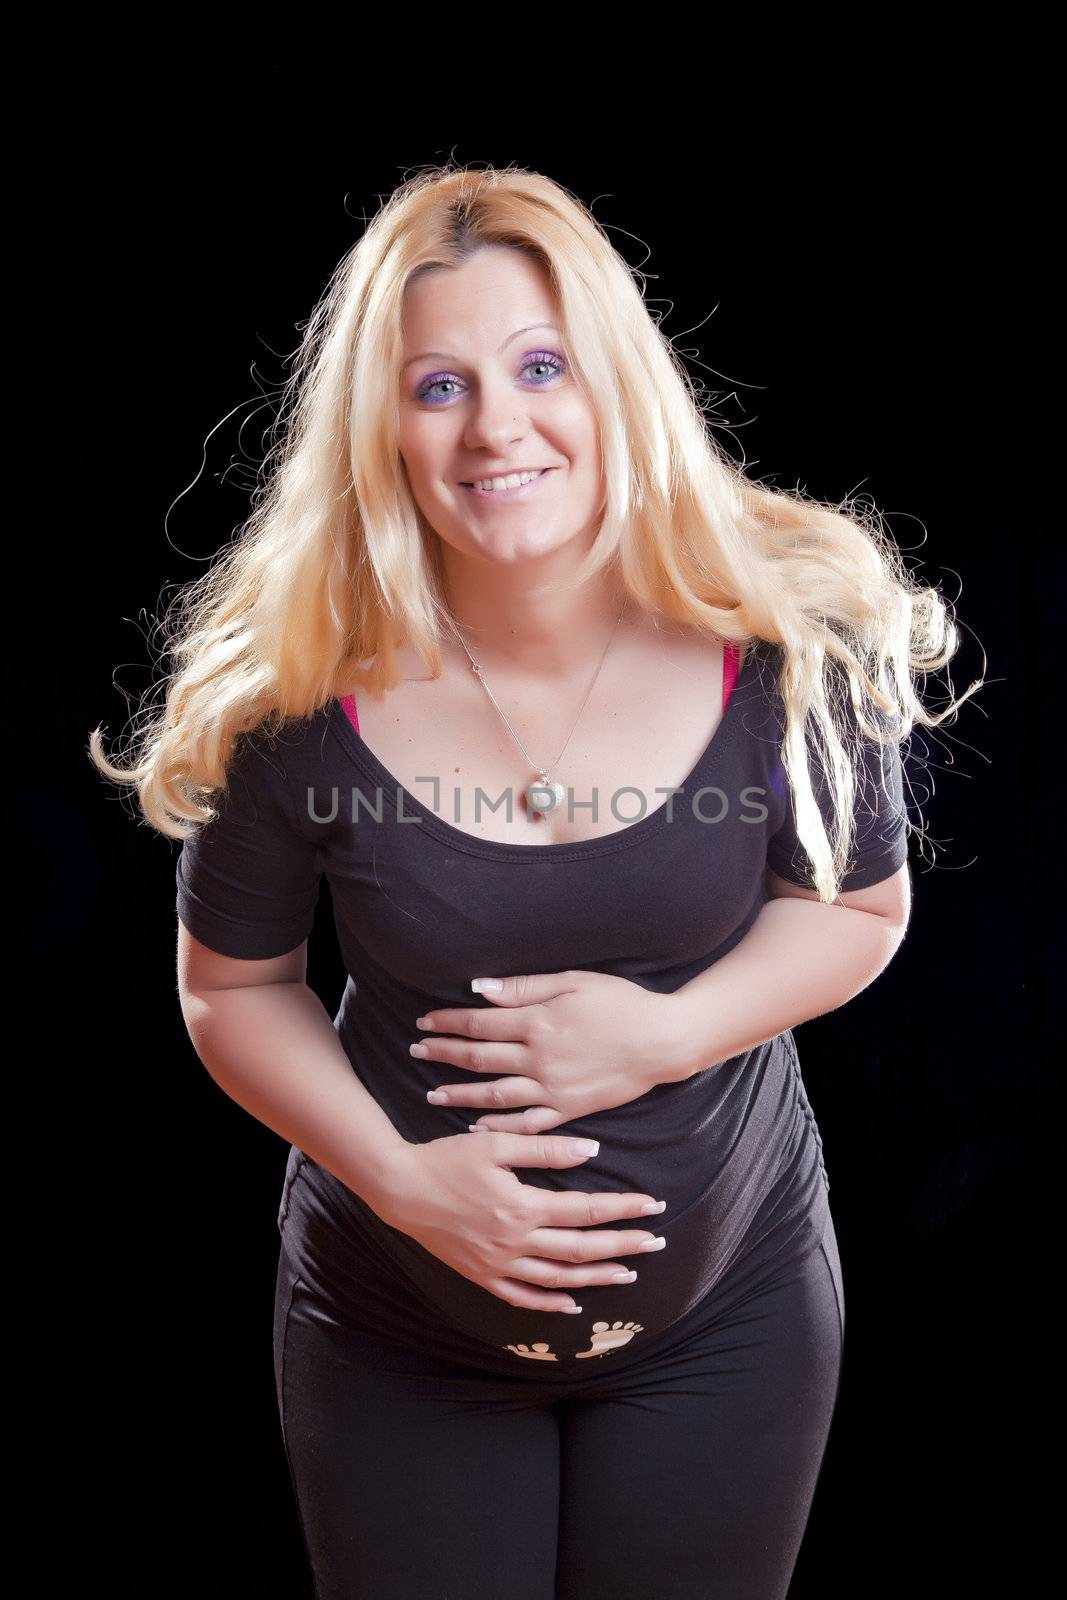 Future mother - Pregnant woman holding tummy